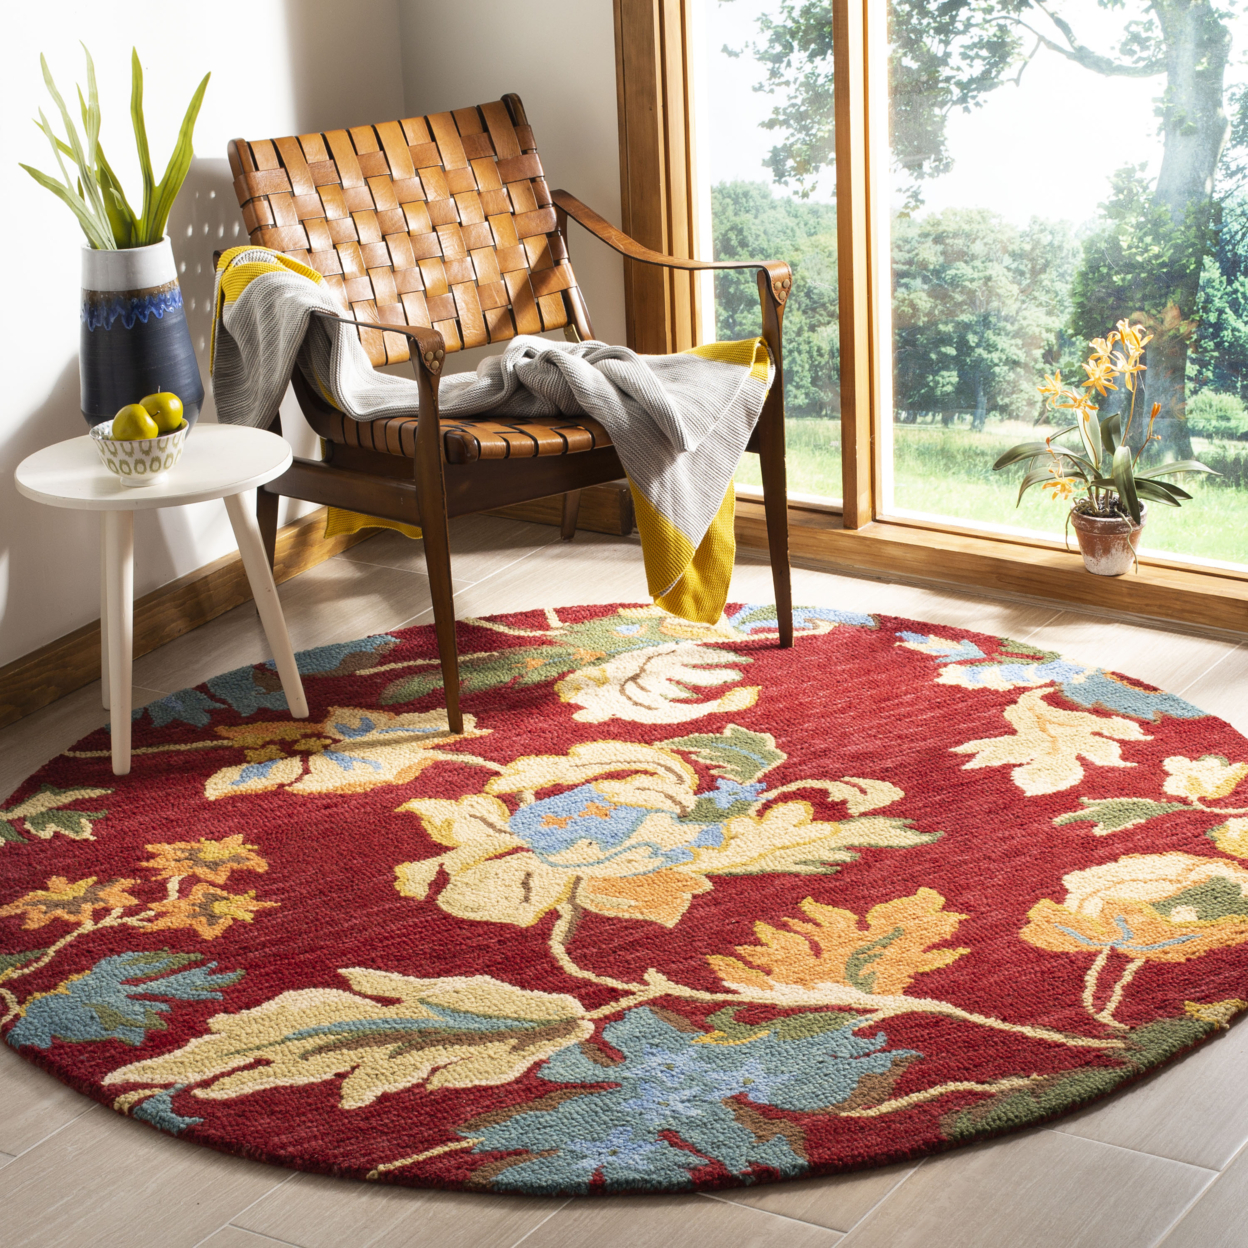 SAFAVIEH Blossom BLM672A Hand-hooked Red / Multi Rug - 4' X 6'